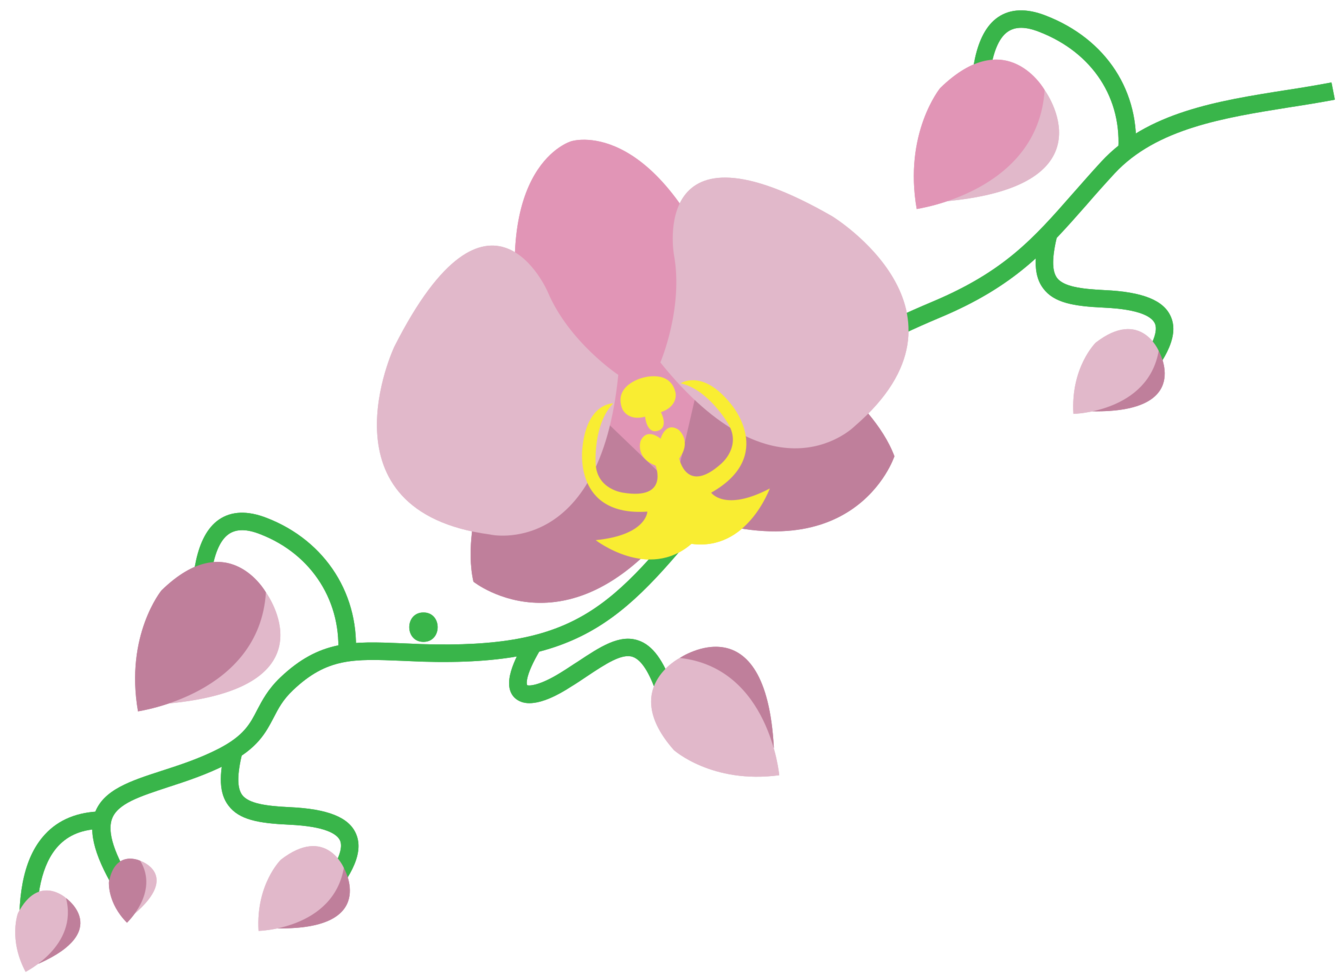 Flower png